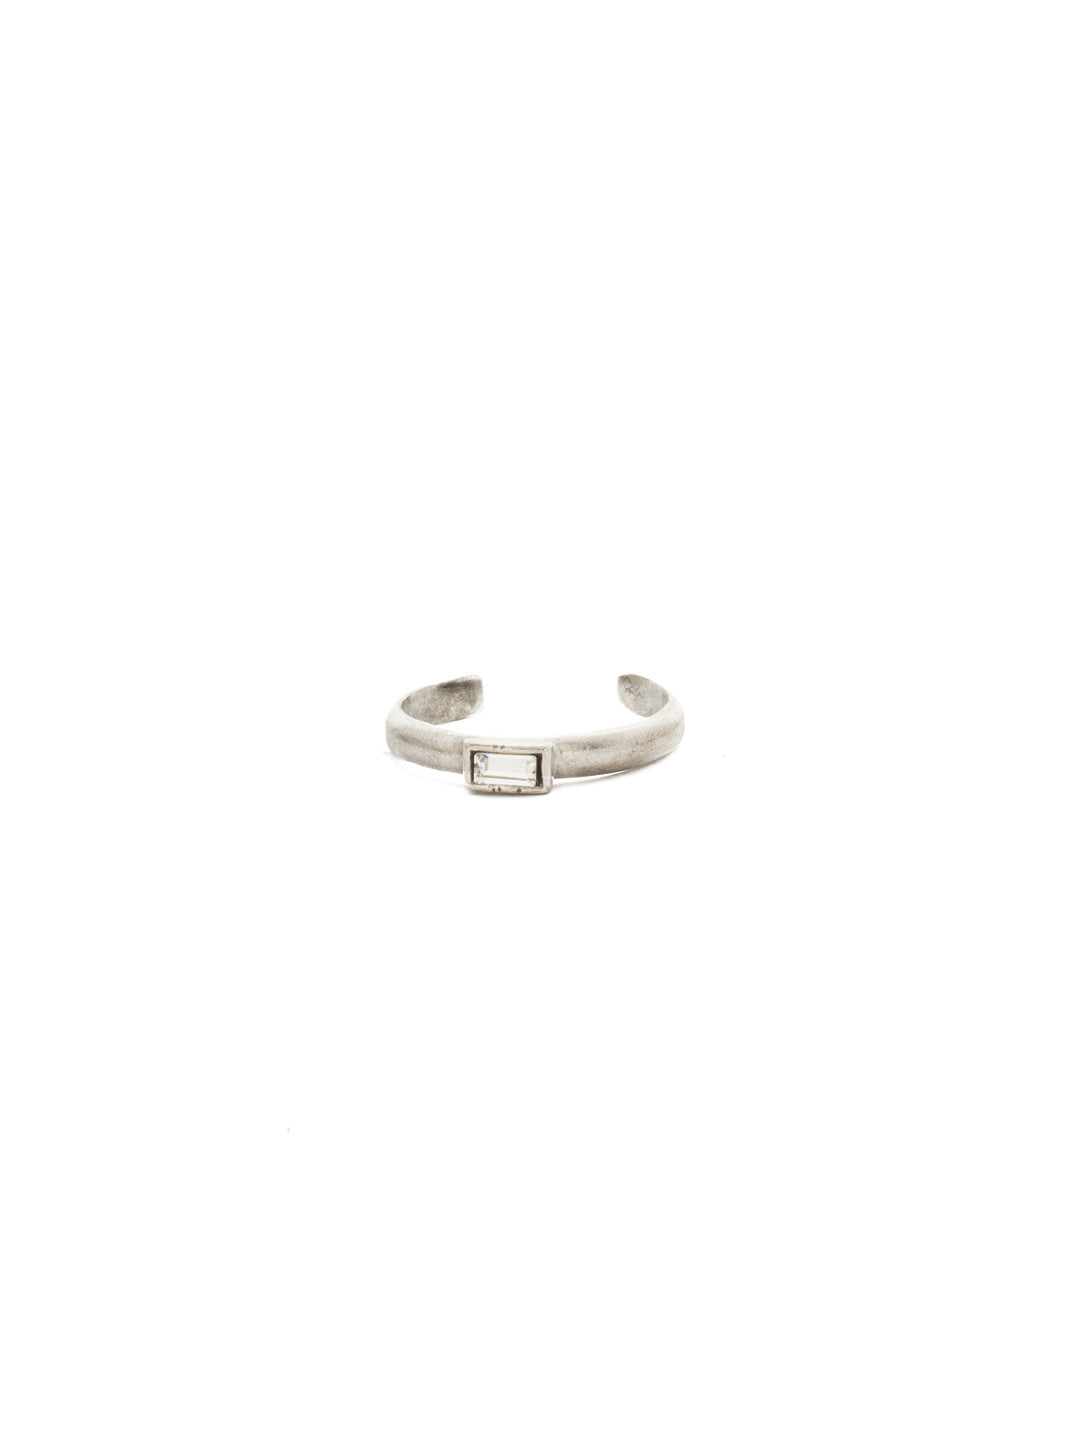 Letita Band Ring - 6RB4ASCAL - A classic Sorrelli style to make a statement or wear everyday. From Sorrelli's Calla Lily collection in our Antique Silver-tone finish.